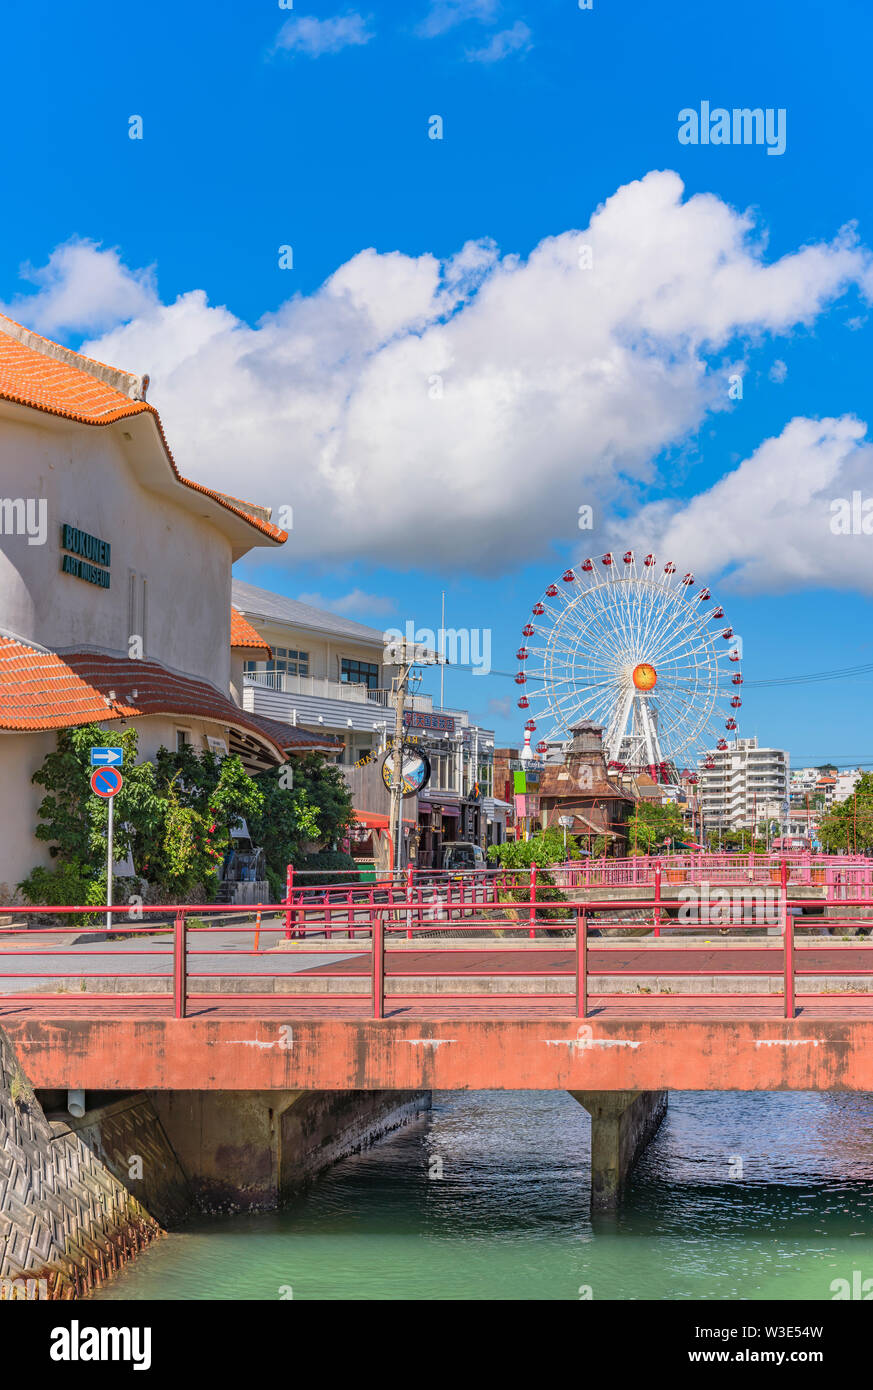 Chatan City red steel bridge and Mihama Carnival Park Ferris wheel in the American Village Stock Photo